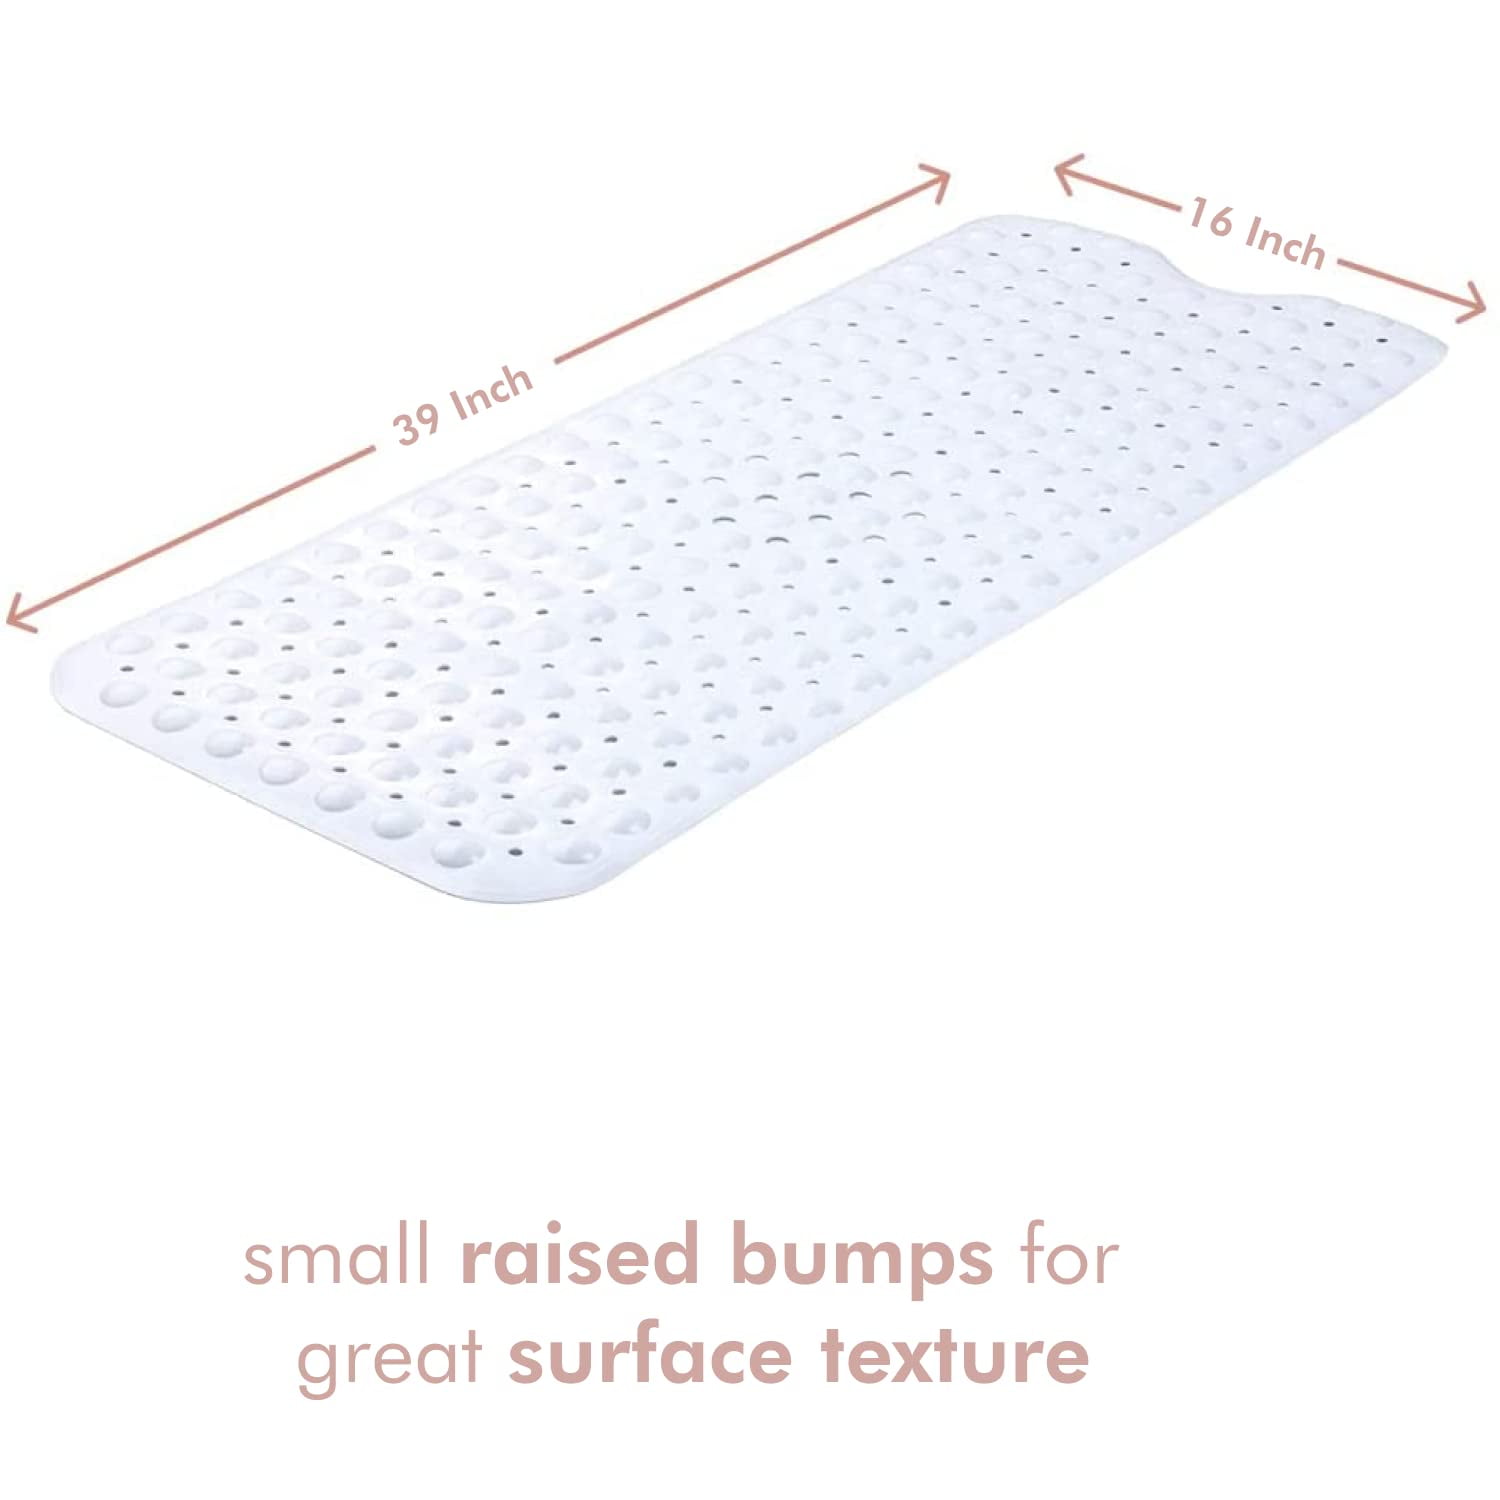 Case of 42 Mats - BULK SAVINGS - 16 x 40 WHITE Textured Non-Slip Adhesive  Bathmat with Drain Cut Out - In Stock - Drop Ships